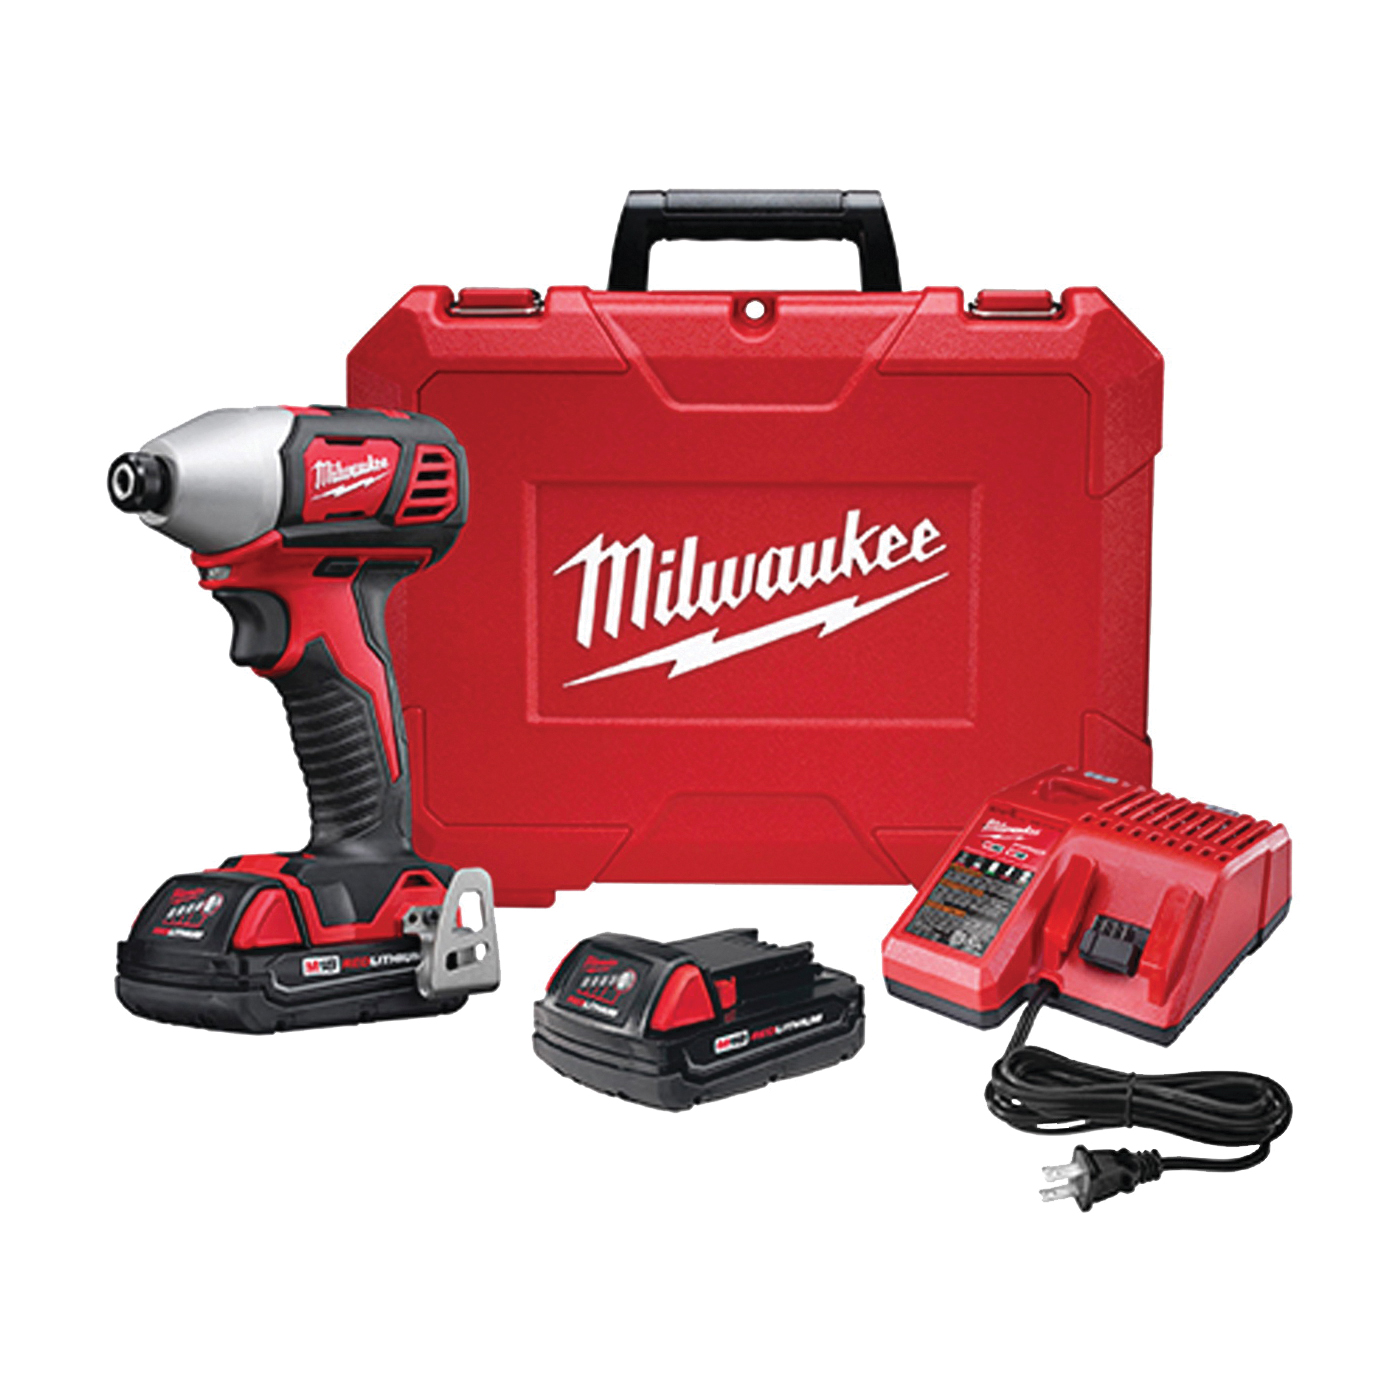 Milwaukee 2657-22CT Impact Driver Kit, Battery Included, 18 V, 1.5 Ah, 1/4 in Drive, Hex Drive, 3350 ipm